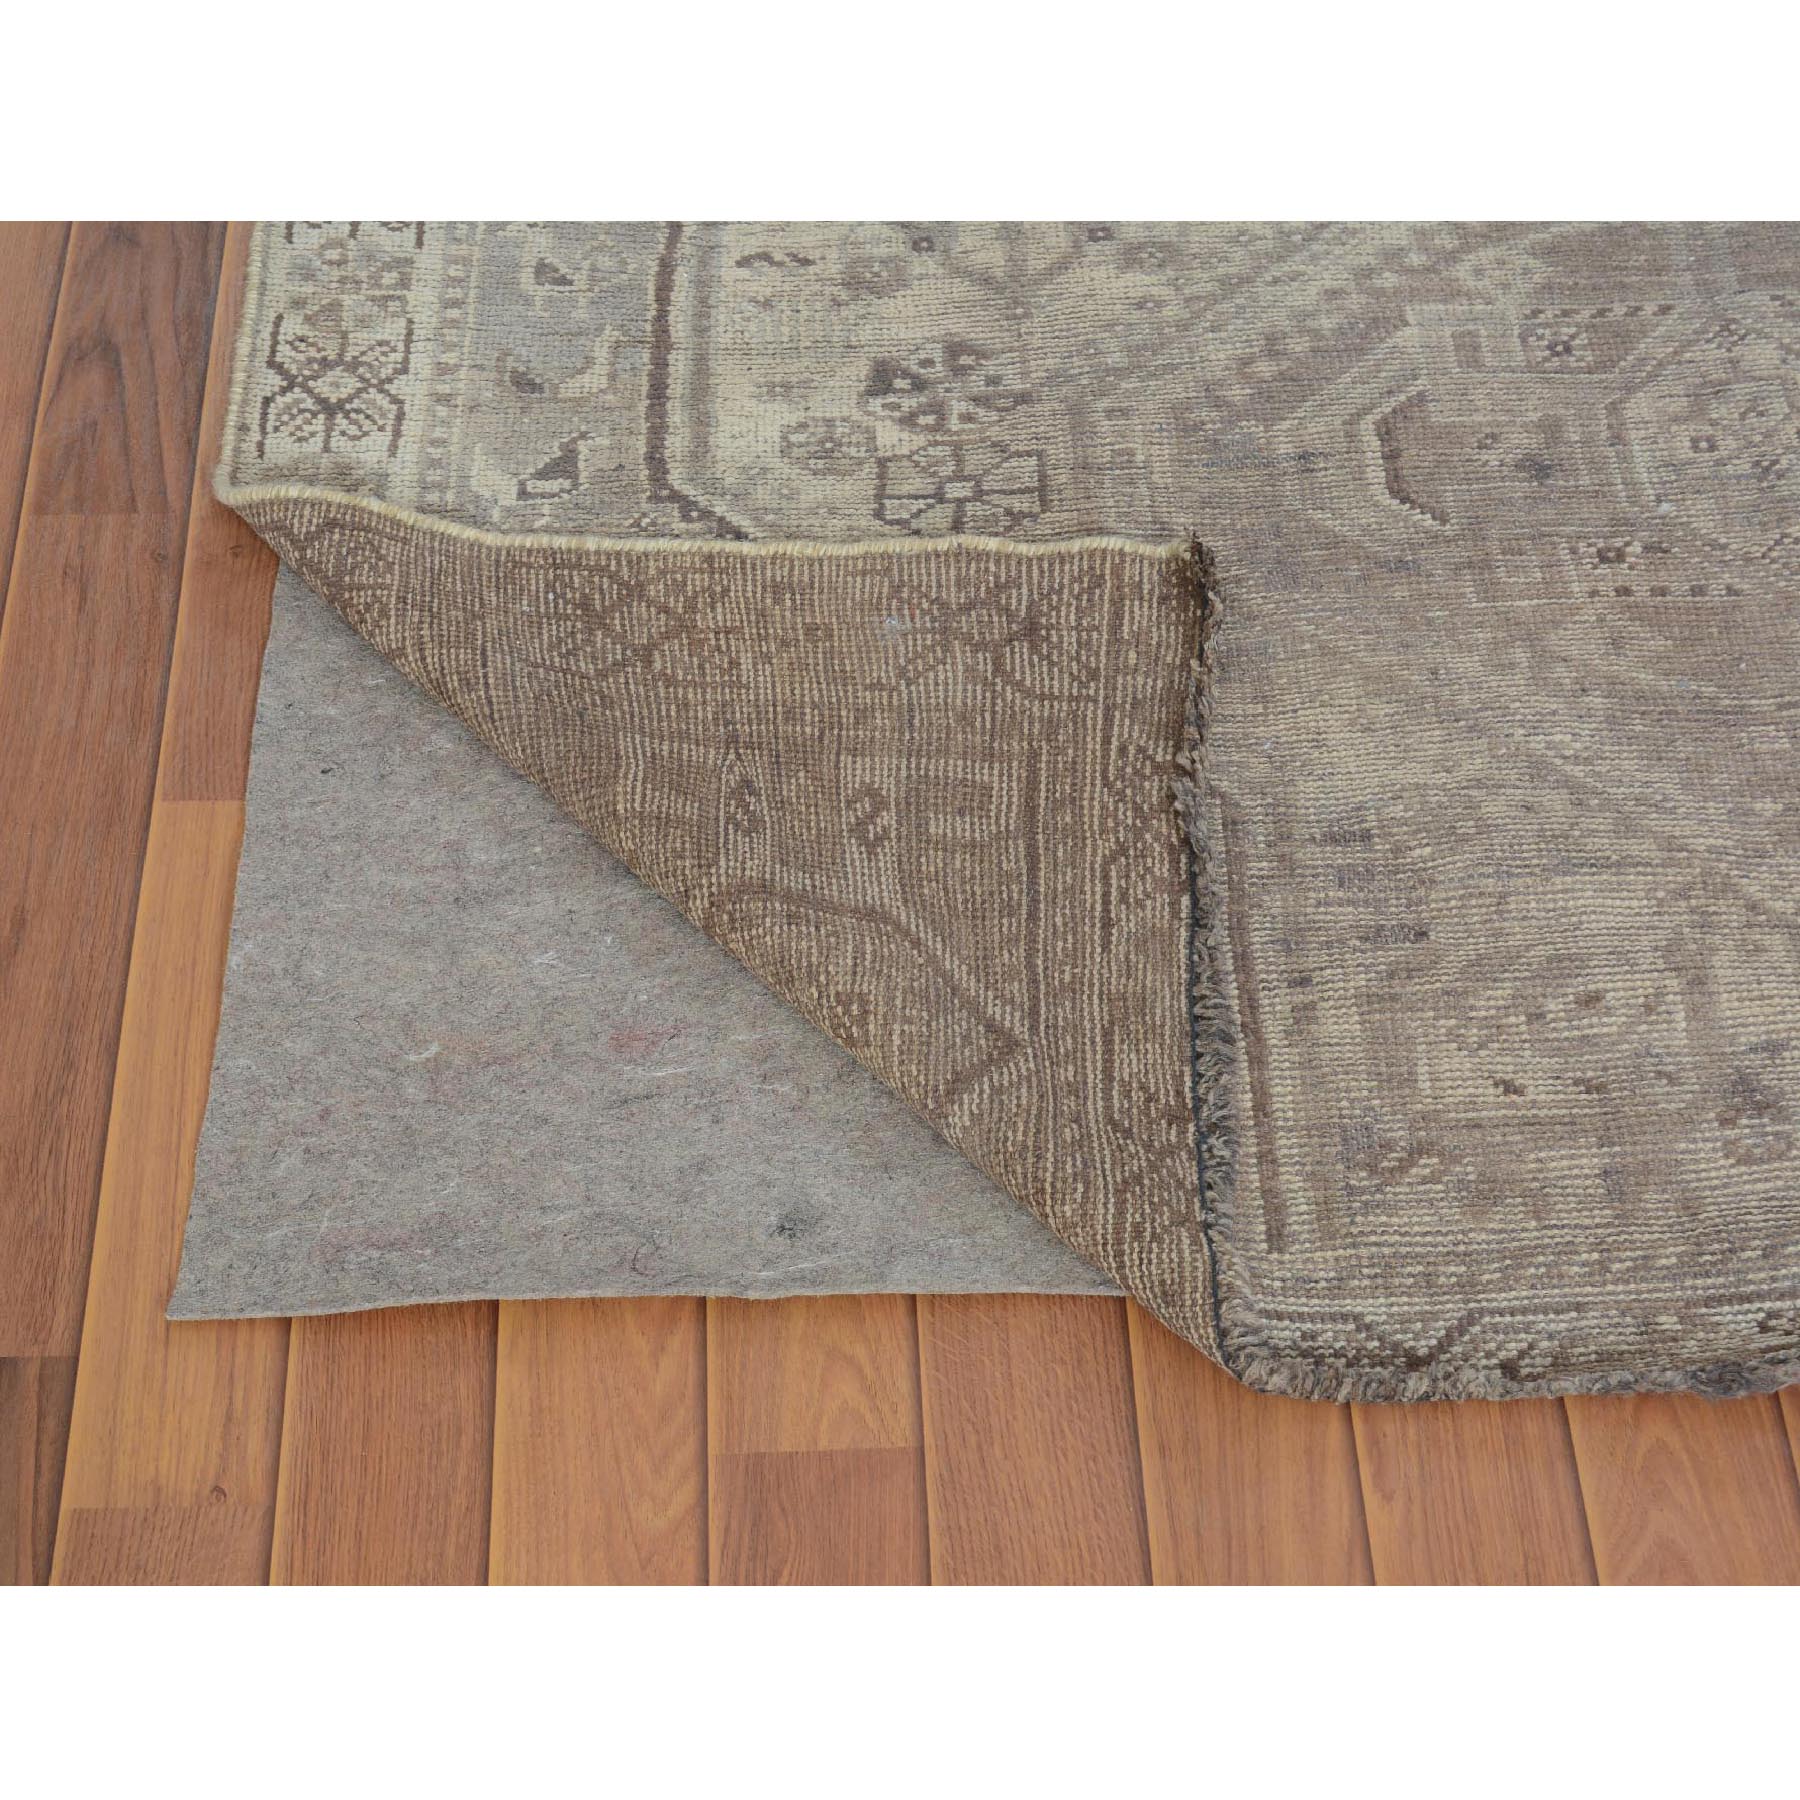 5-8 x8- Natural Colors Vintage And Worn Down Persian Hand Knotted Oriental Rug 